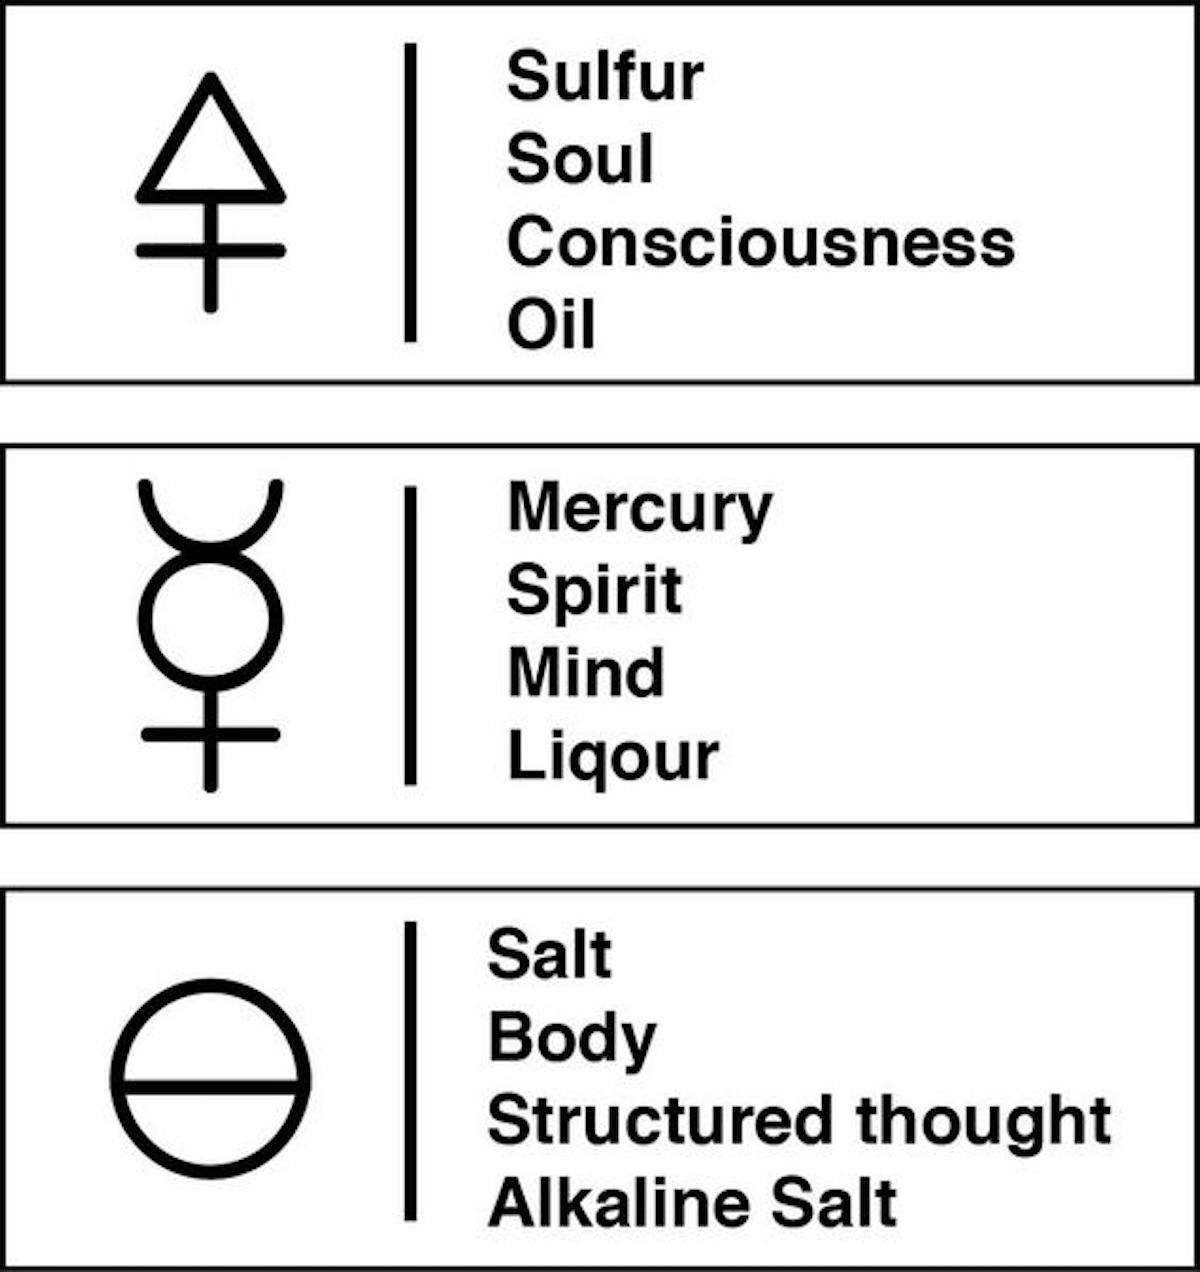 latin symbols and meanings